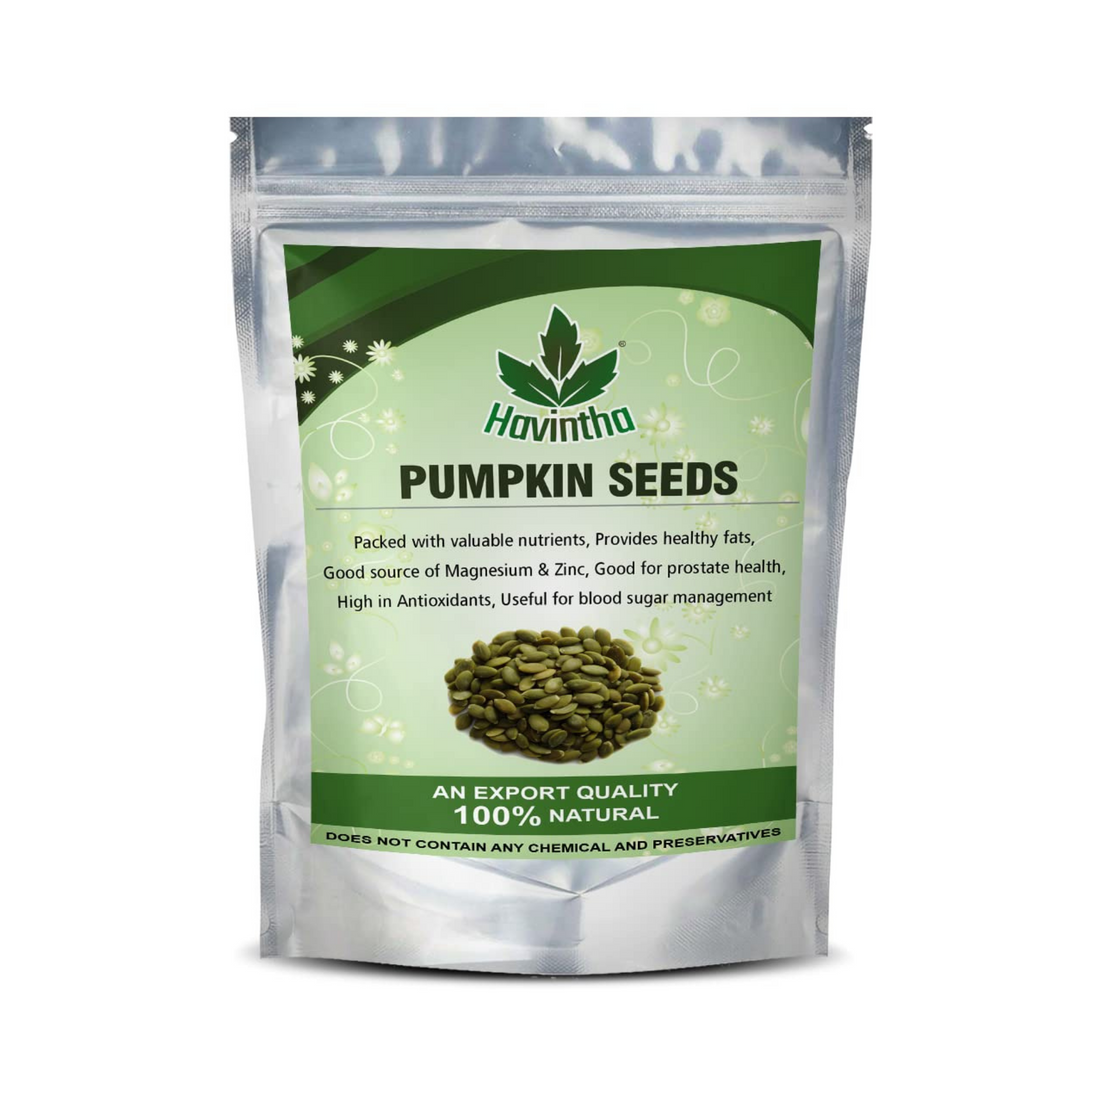 Havintha pumpkin seeds for Eating (Raw And Unroasted), Immunity Booster Seeds - 227 Grams